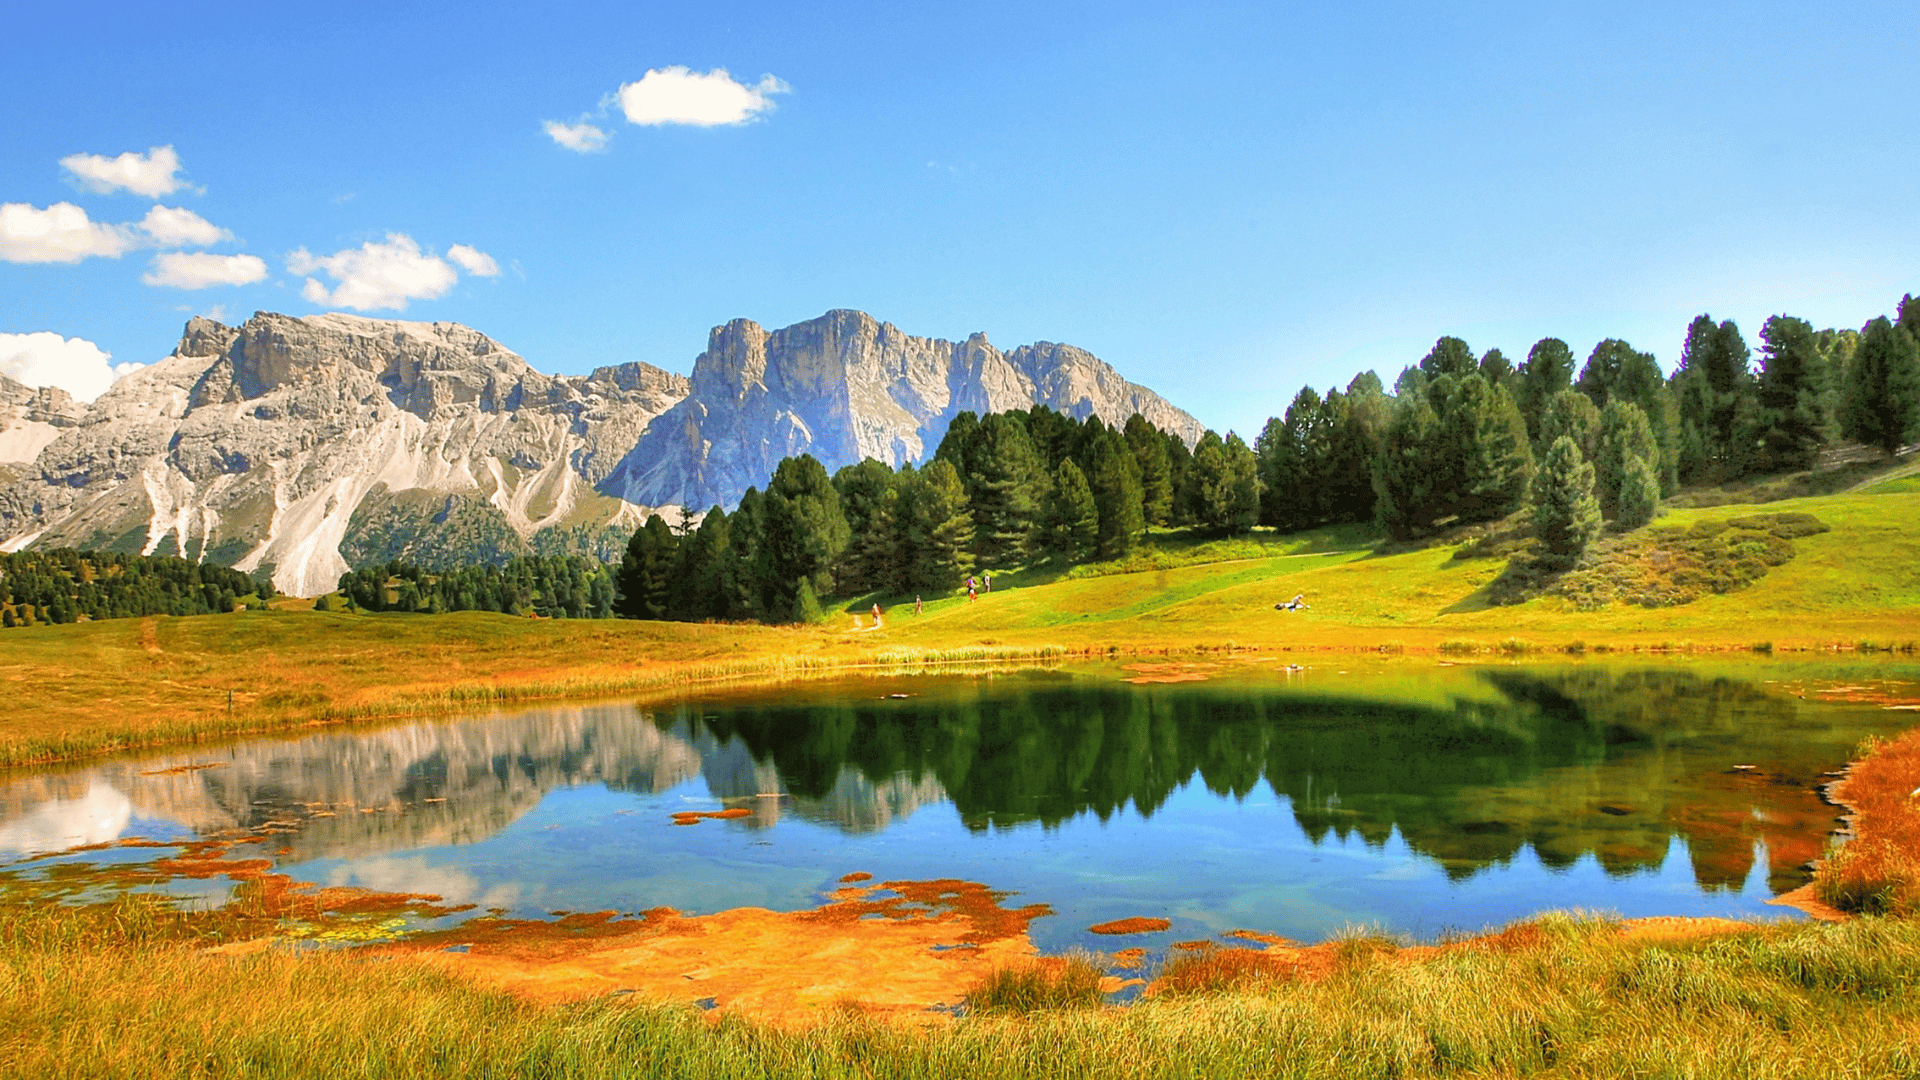 A mountainous landscape view with a pond in the forefront thar reflects the trees just behind it